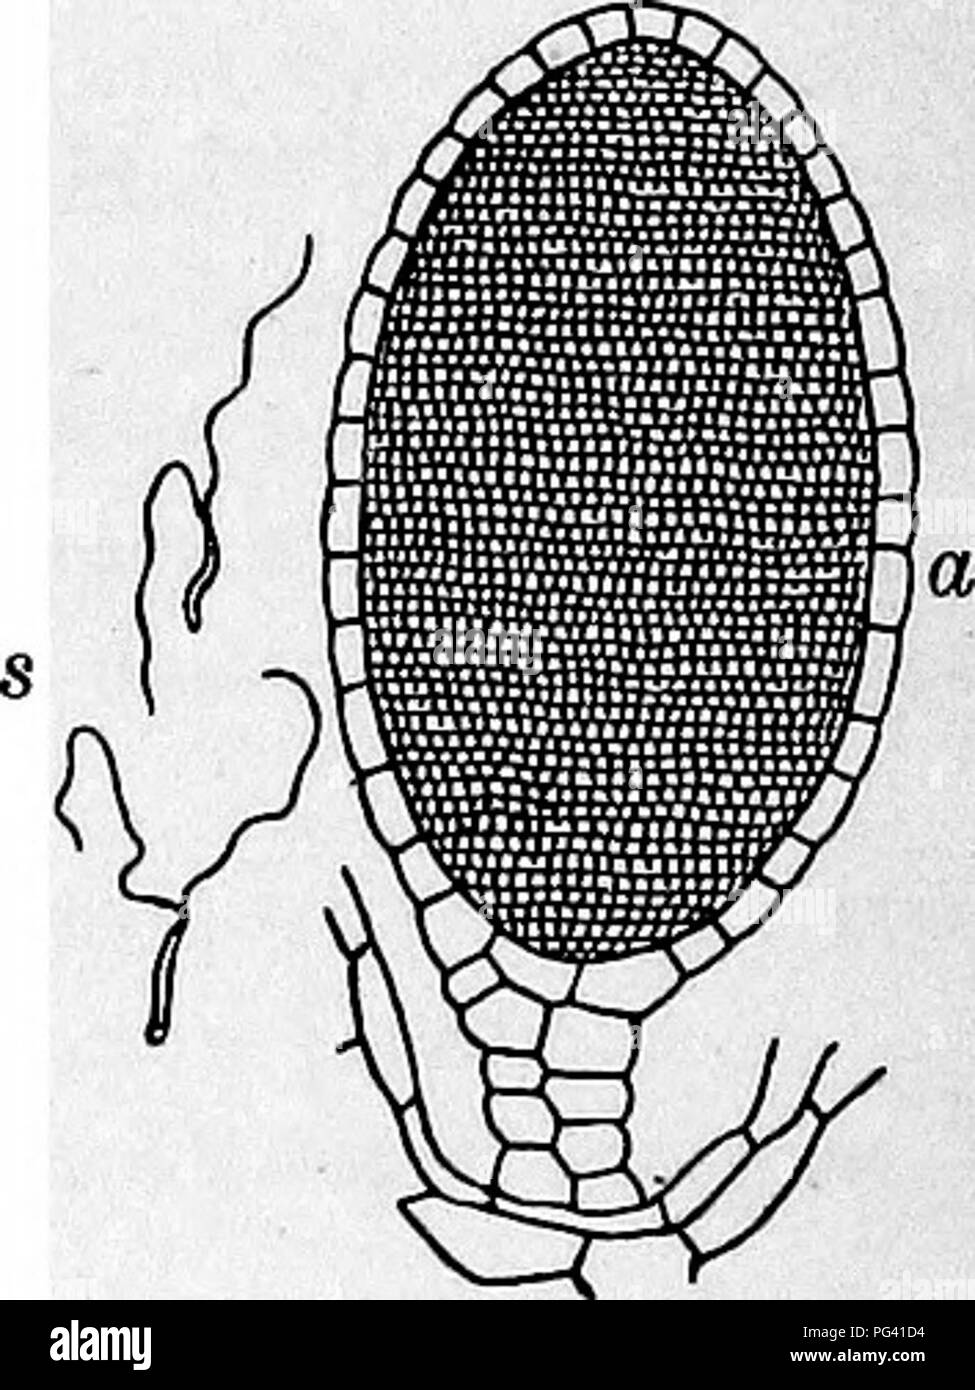 . Essentials of botany. Botany; Botany. Fie. 192. Section through An- theridial Eeceptaole of Mar- chantia. (Magnified.) a, antheridium. (f) The female receptacles, stalked structures with finger-like re- curved arms radiating from the center. With the magnifying glass examine the under surface of a very mature receptacle and note the young sporophytes, or spore-plants, hanging from the receptacle. Draw. 344. Minute Structure of Thallus and Buds. — Cut thin cross-sections of the thallus and examine with l.p. and then with m.p. Note : (a) The general structure of the thallus, with a firm upper  Stock Photo